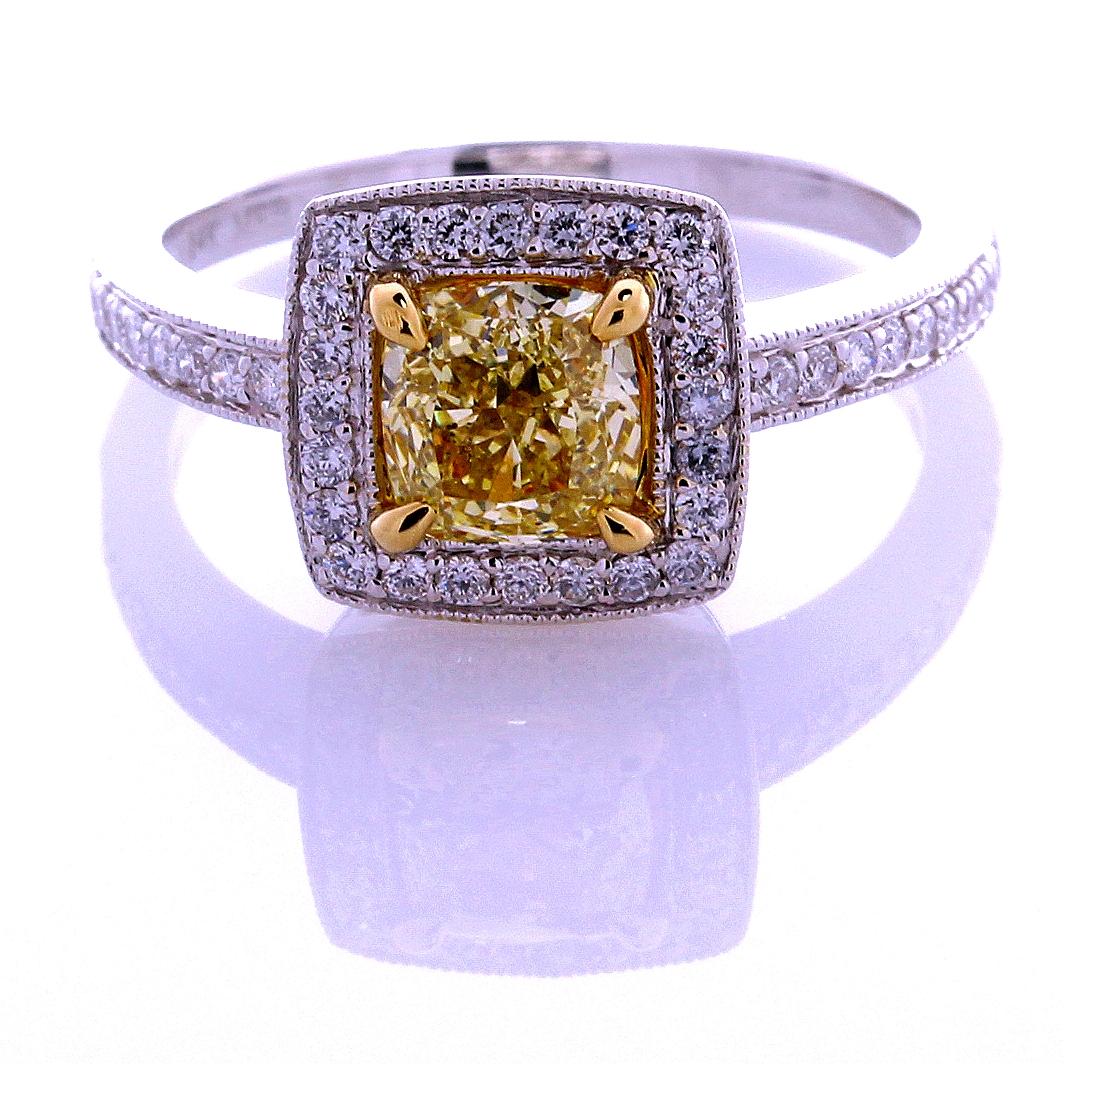 Incredible Deal on GIA Certified 1.08 Carat Cushion Cut, Natural Fancy Yellow Even, Diamond Ring, SI1 clarity, measuring 5.95-5.72x3.61. Total Carat Weight on the ring is 1.40.
GIA CERTIFICATE #2185211143.  
This mounting is made from 14 Karat White